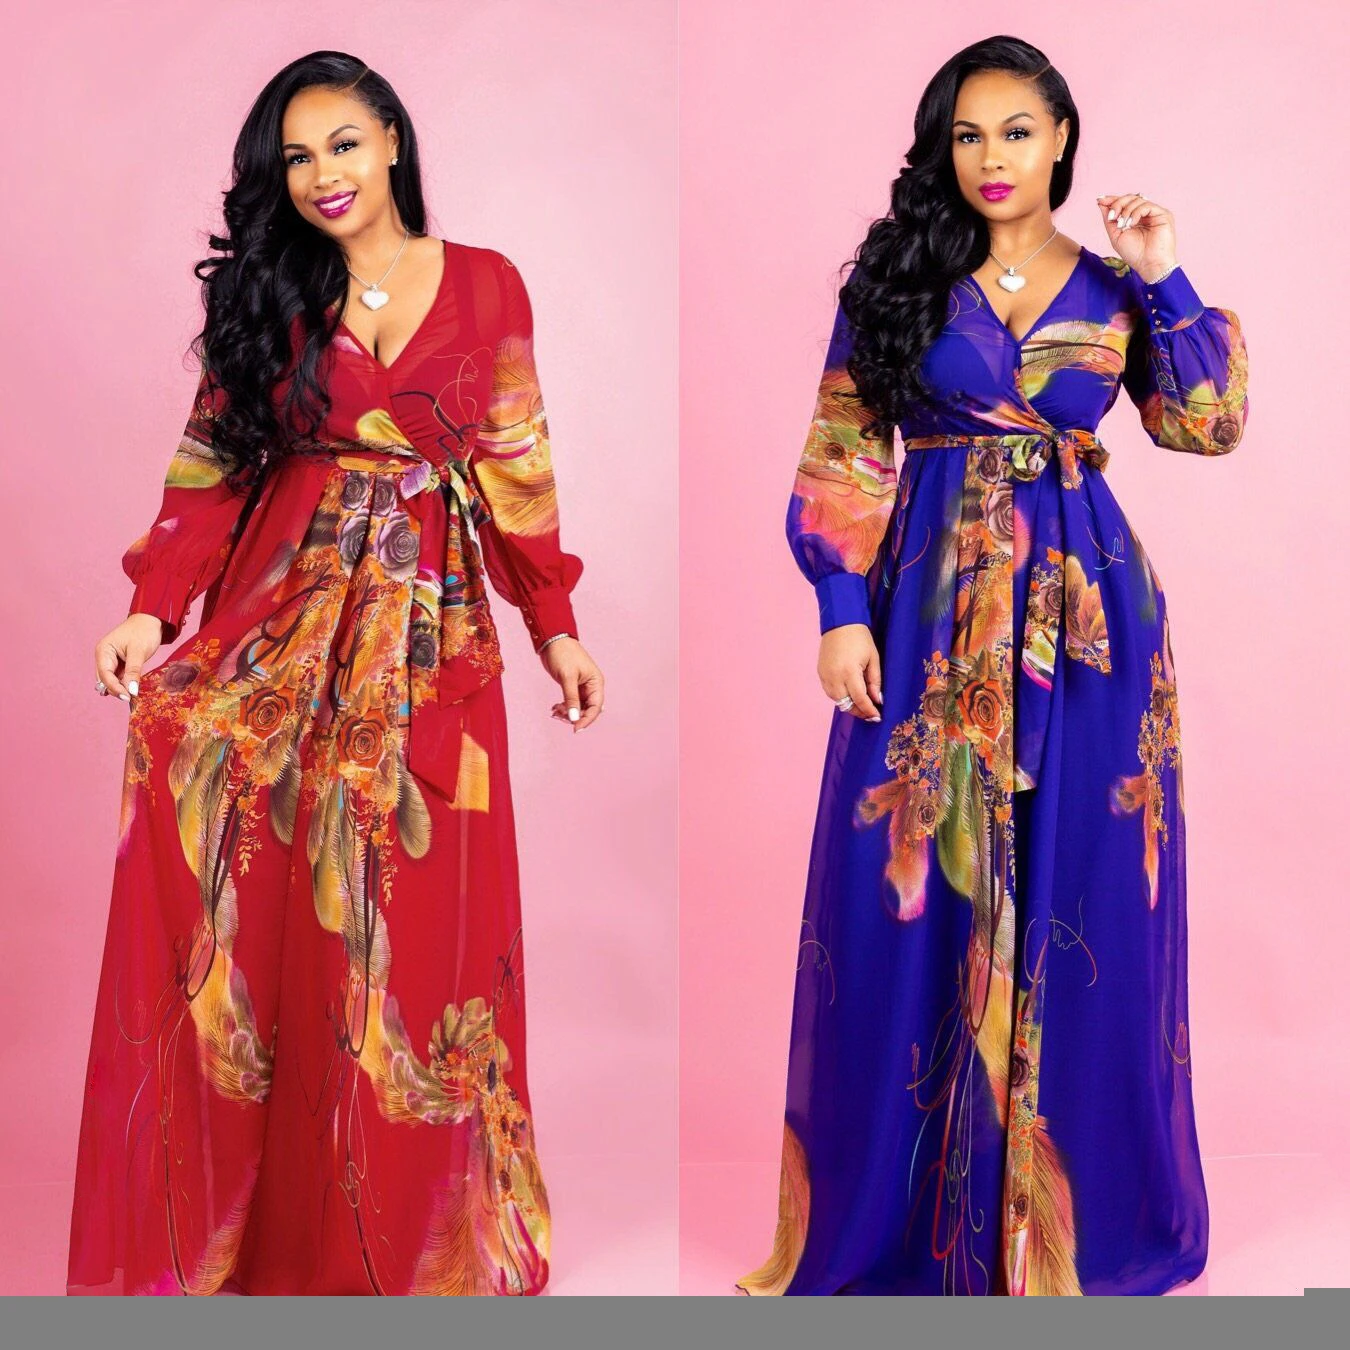 Wholesale Bohemia Woman Casual Dress Plus Size African Style V Neck Floral Print Chiffon Maxi Dresses Clothing Women Summer 2020